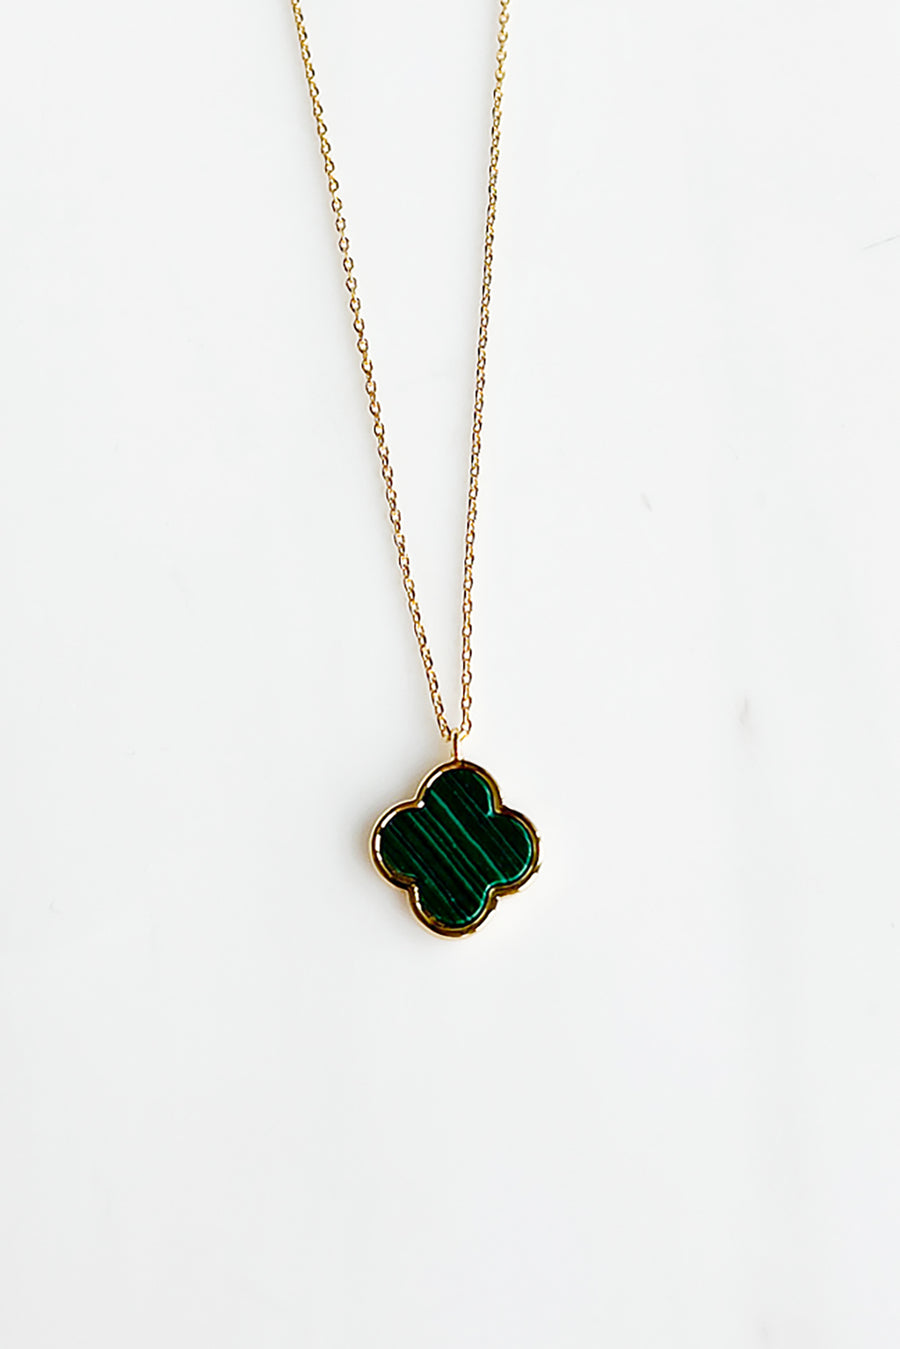 Who Needs Luck Gold Dipped Pendant Necklace (Gold/Green) - NanaMacs